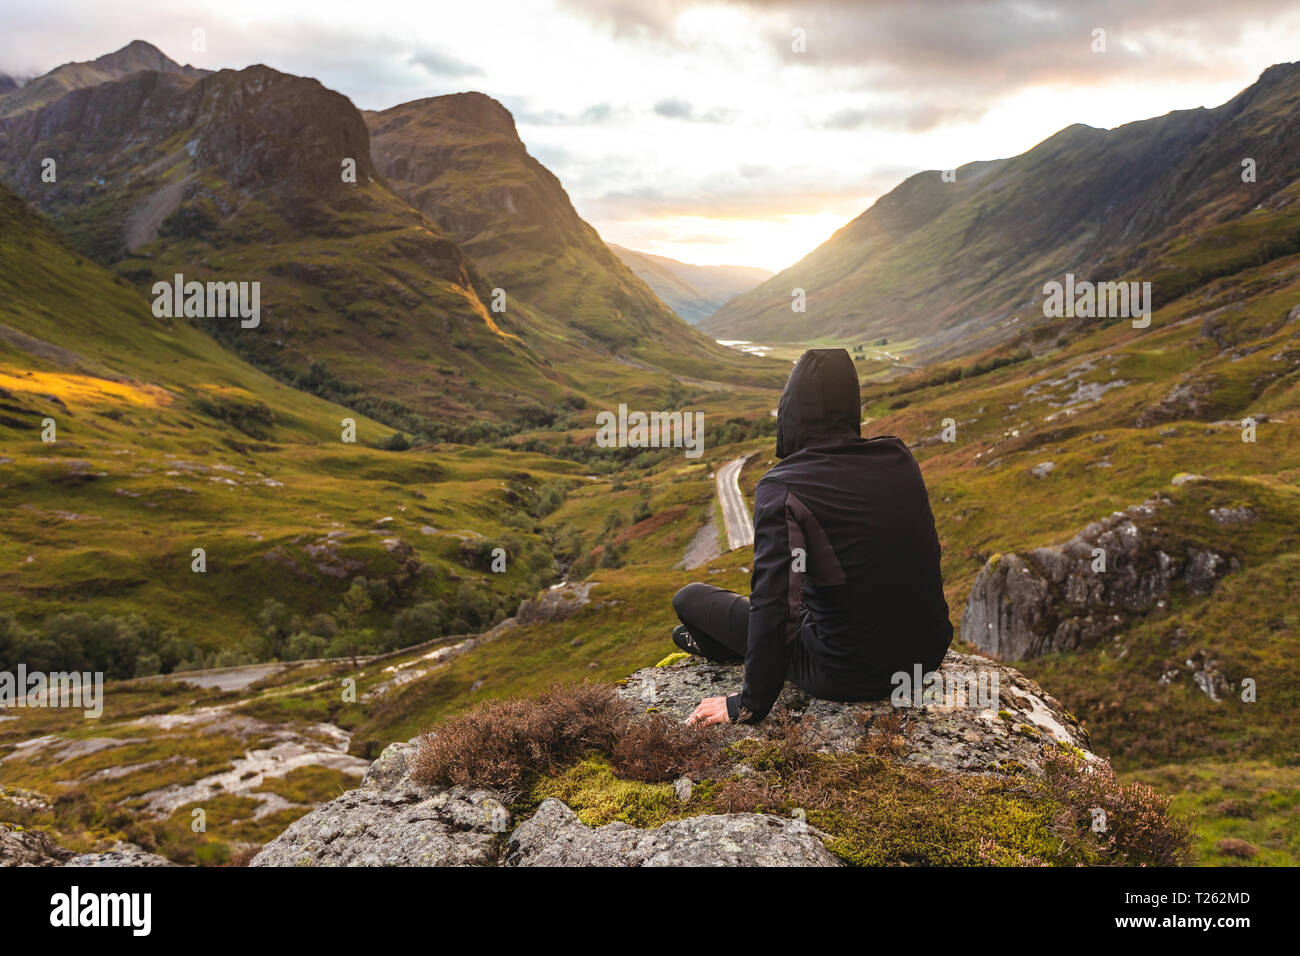 UK, Scotland, Man looking at view with the Three Sisters of Glencoe mountains on the left and the A82 road in the middle of the valley Stock Photo